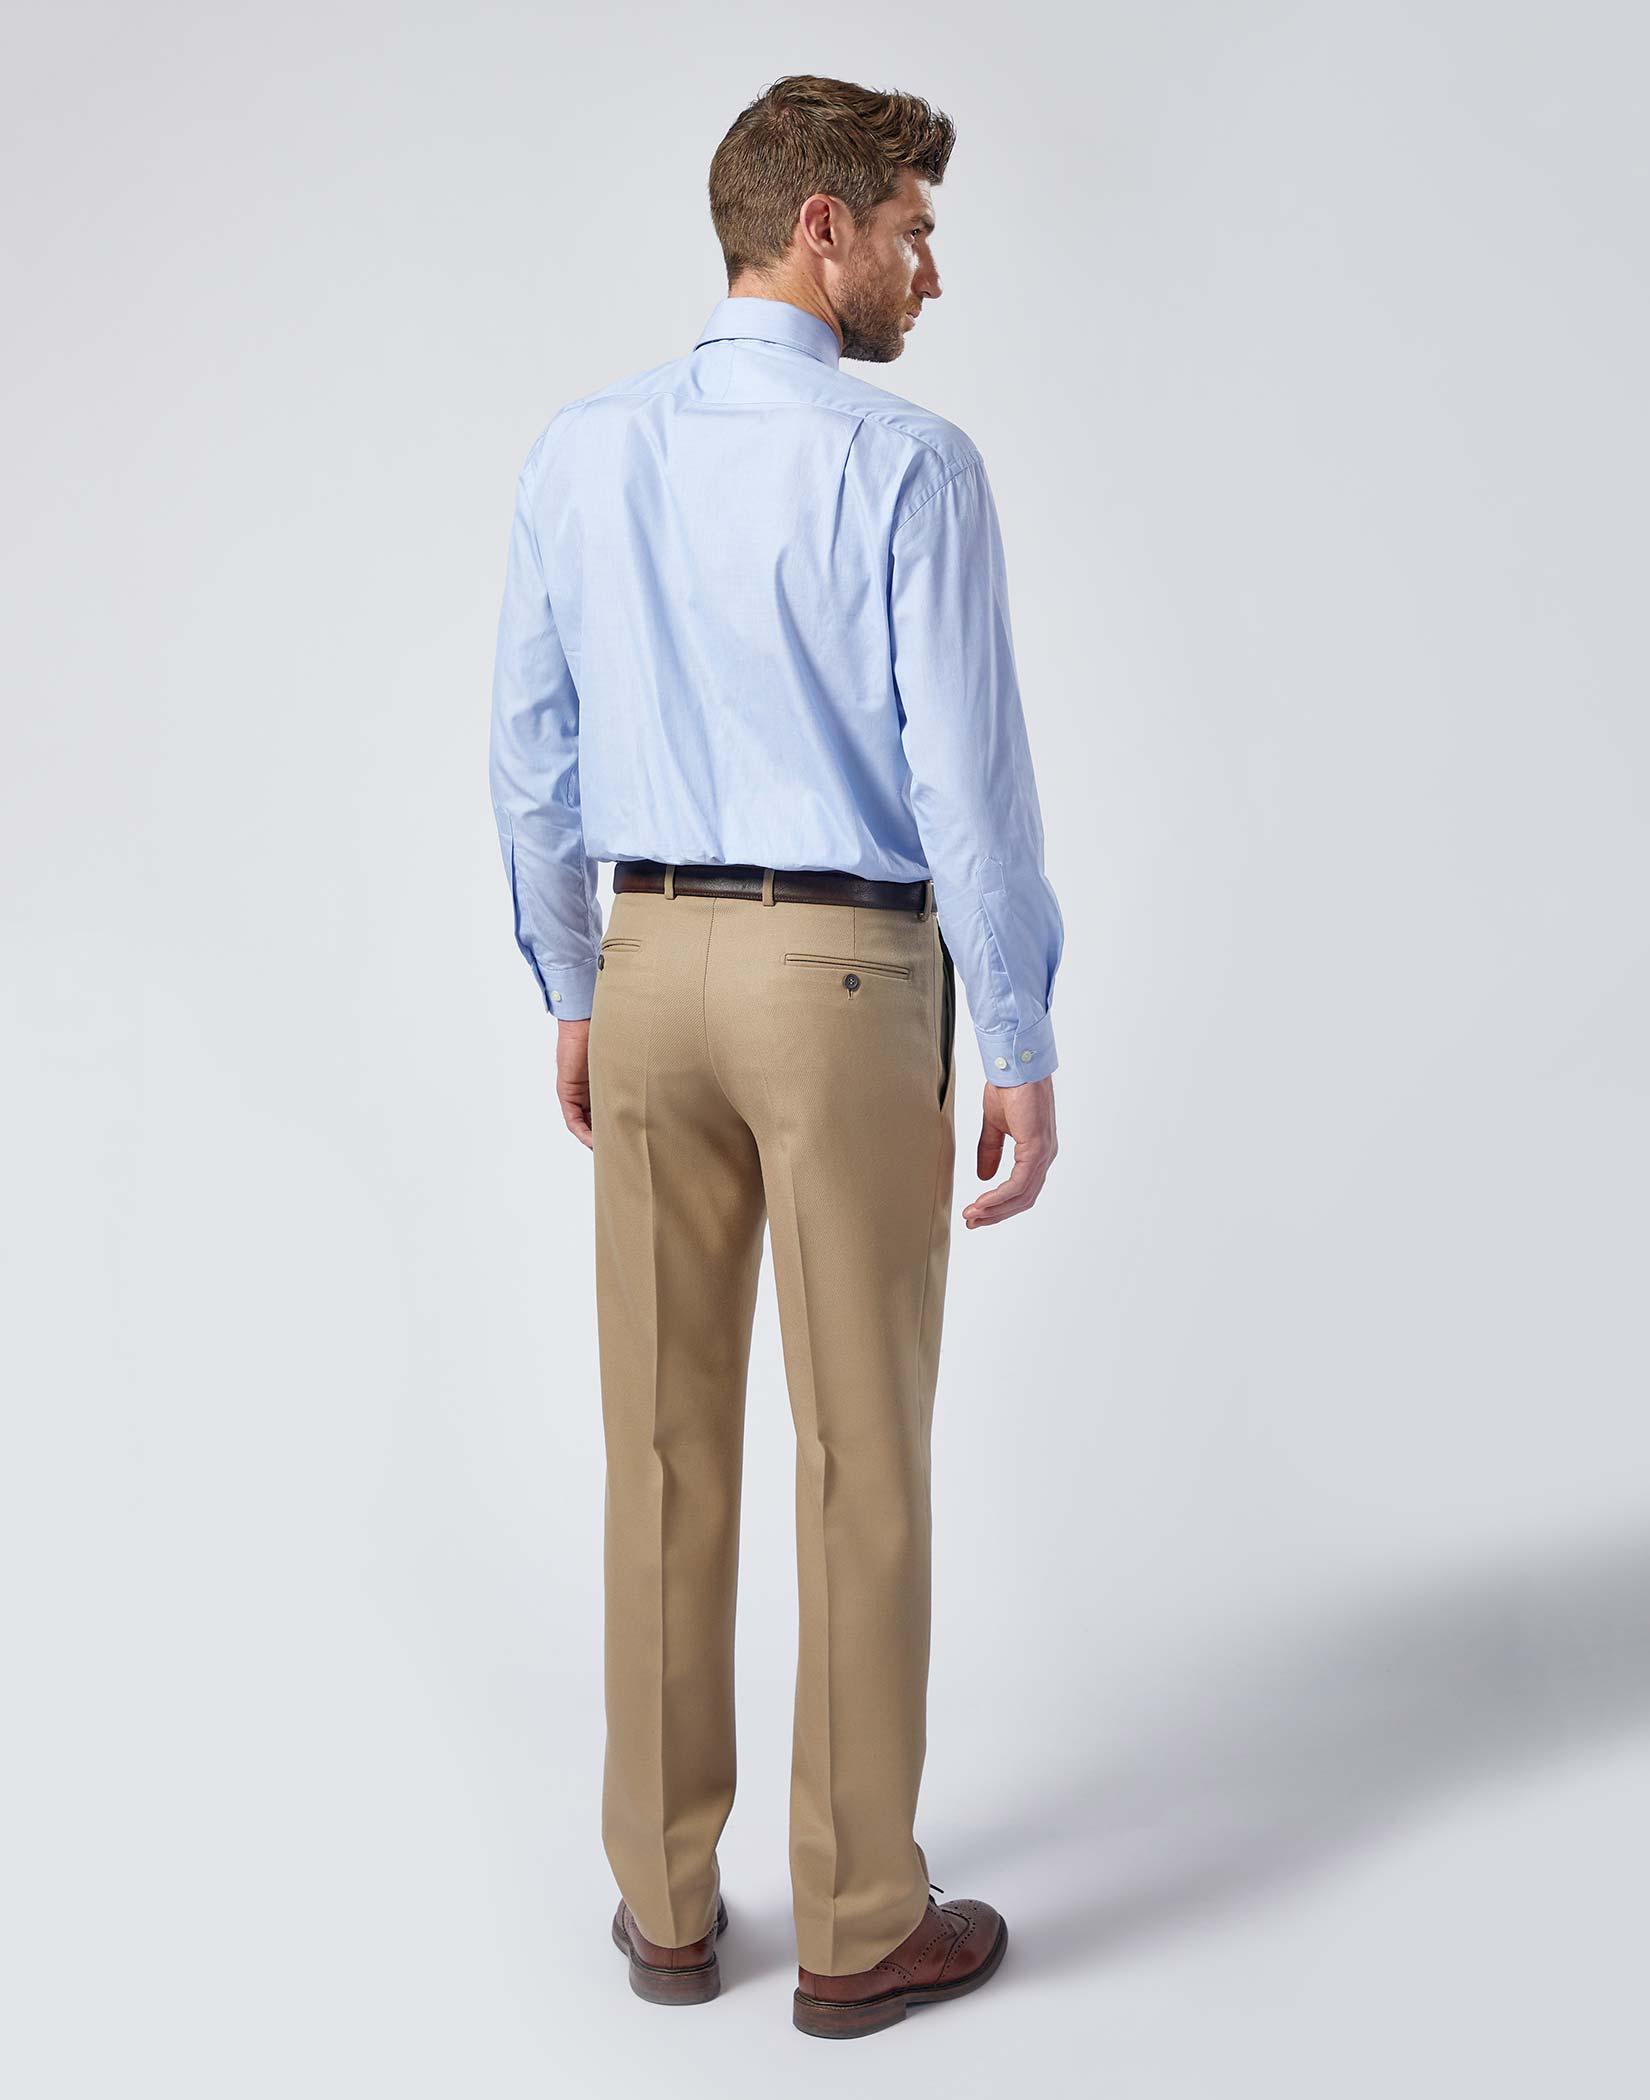 Aggregate more than 70 wool cavalry twill trousers latest - in.coedo.com.vn